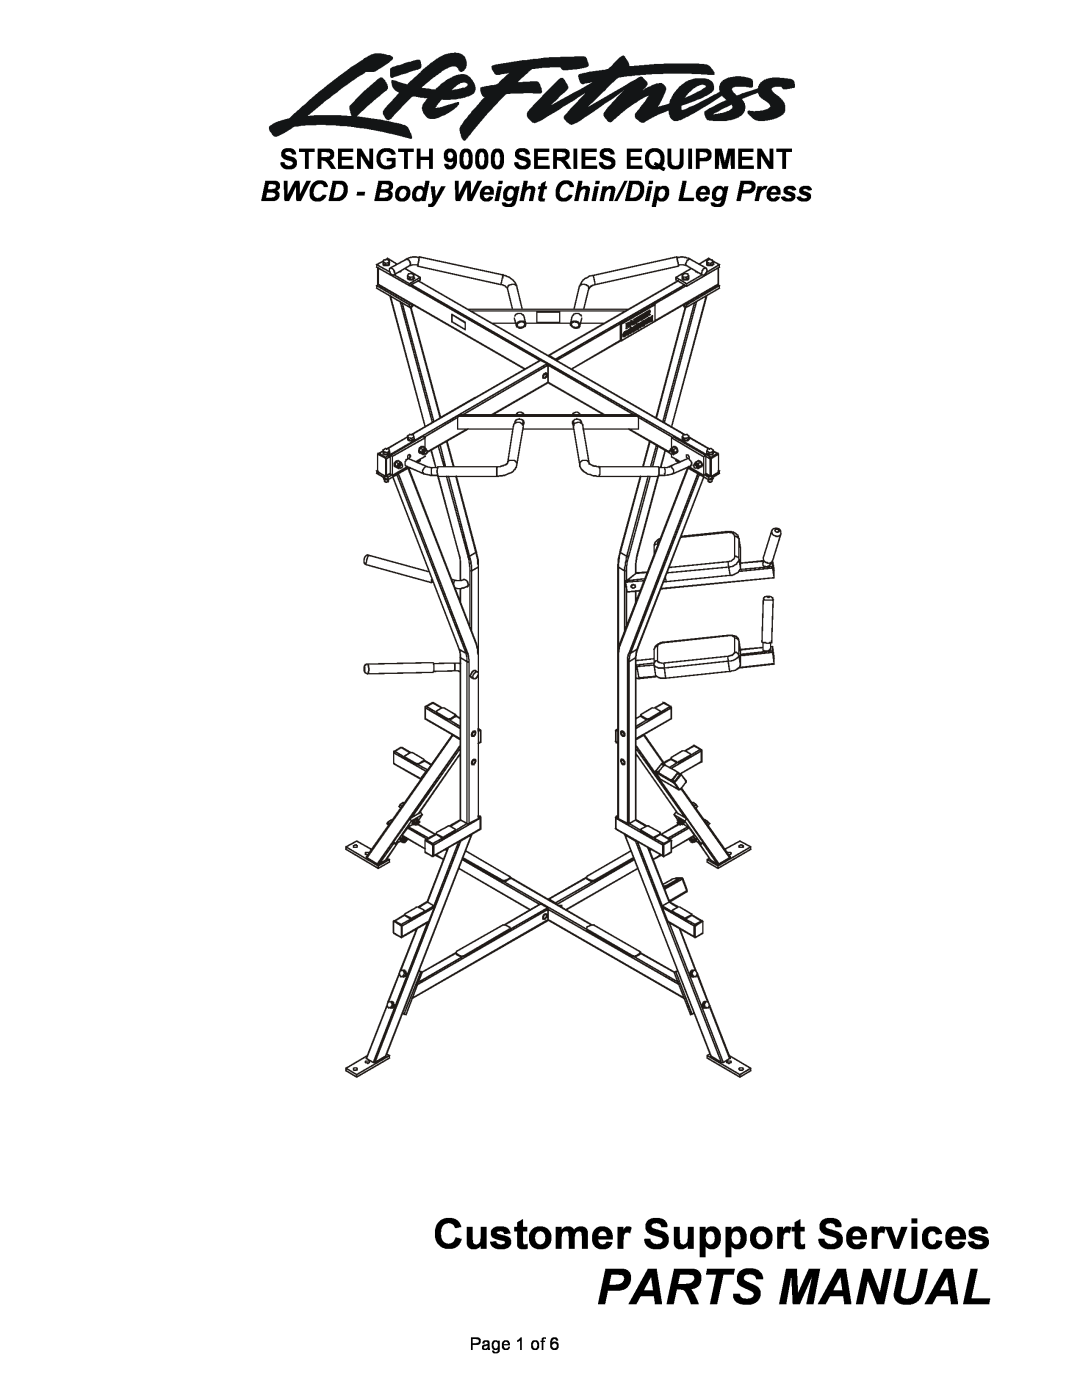 Life Fitness manual STRENGTH 9000 SERIES EQUIPMENT, BWCD - Body Weight Chin/Dip Leg Press, Parts Manual, Page 1 of 